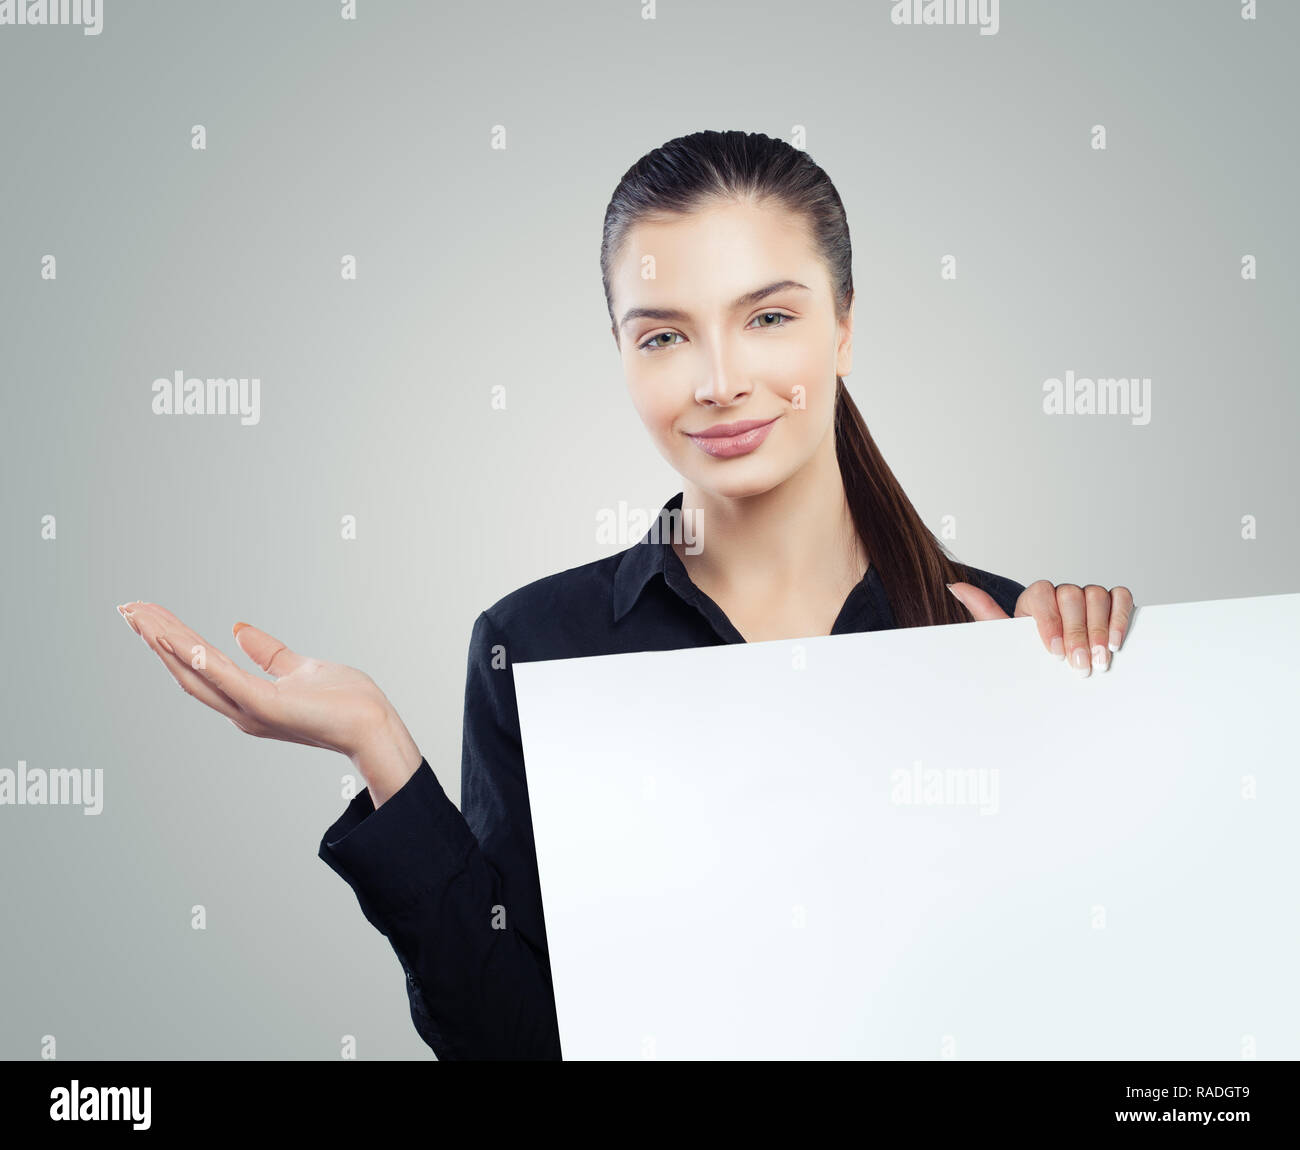 Cute business woman with empty open hand and white blank paper banner background. Young woman smiling. Business and education concept Stock Photo